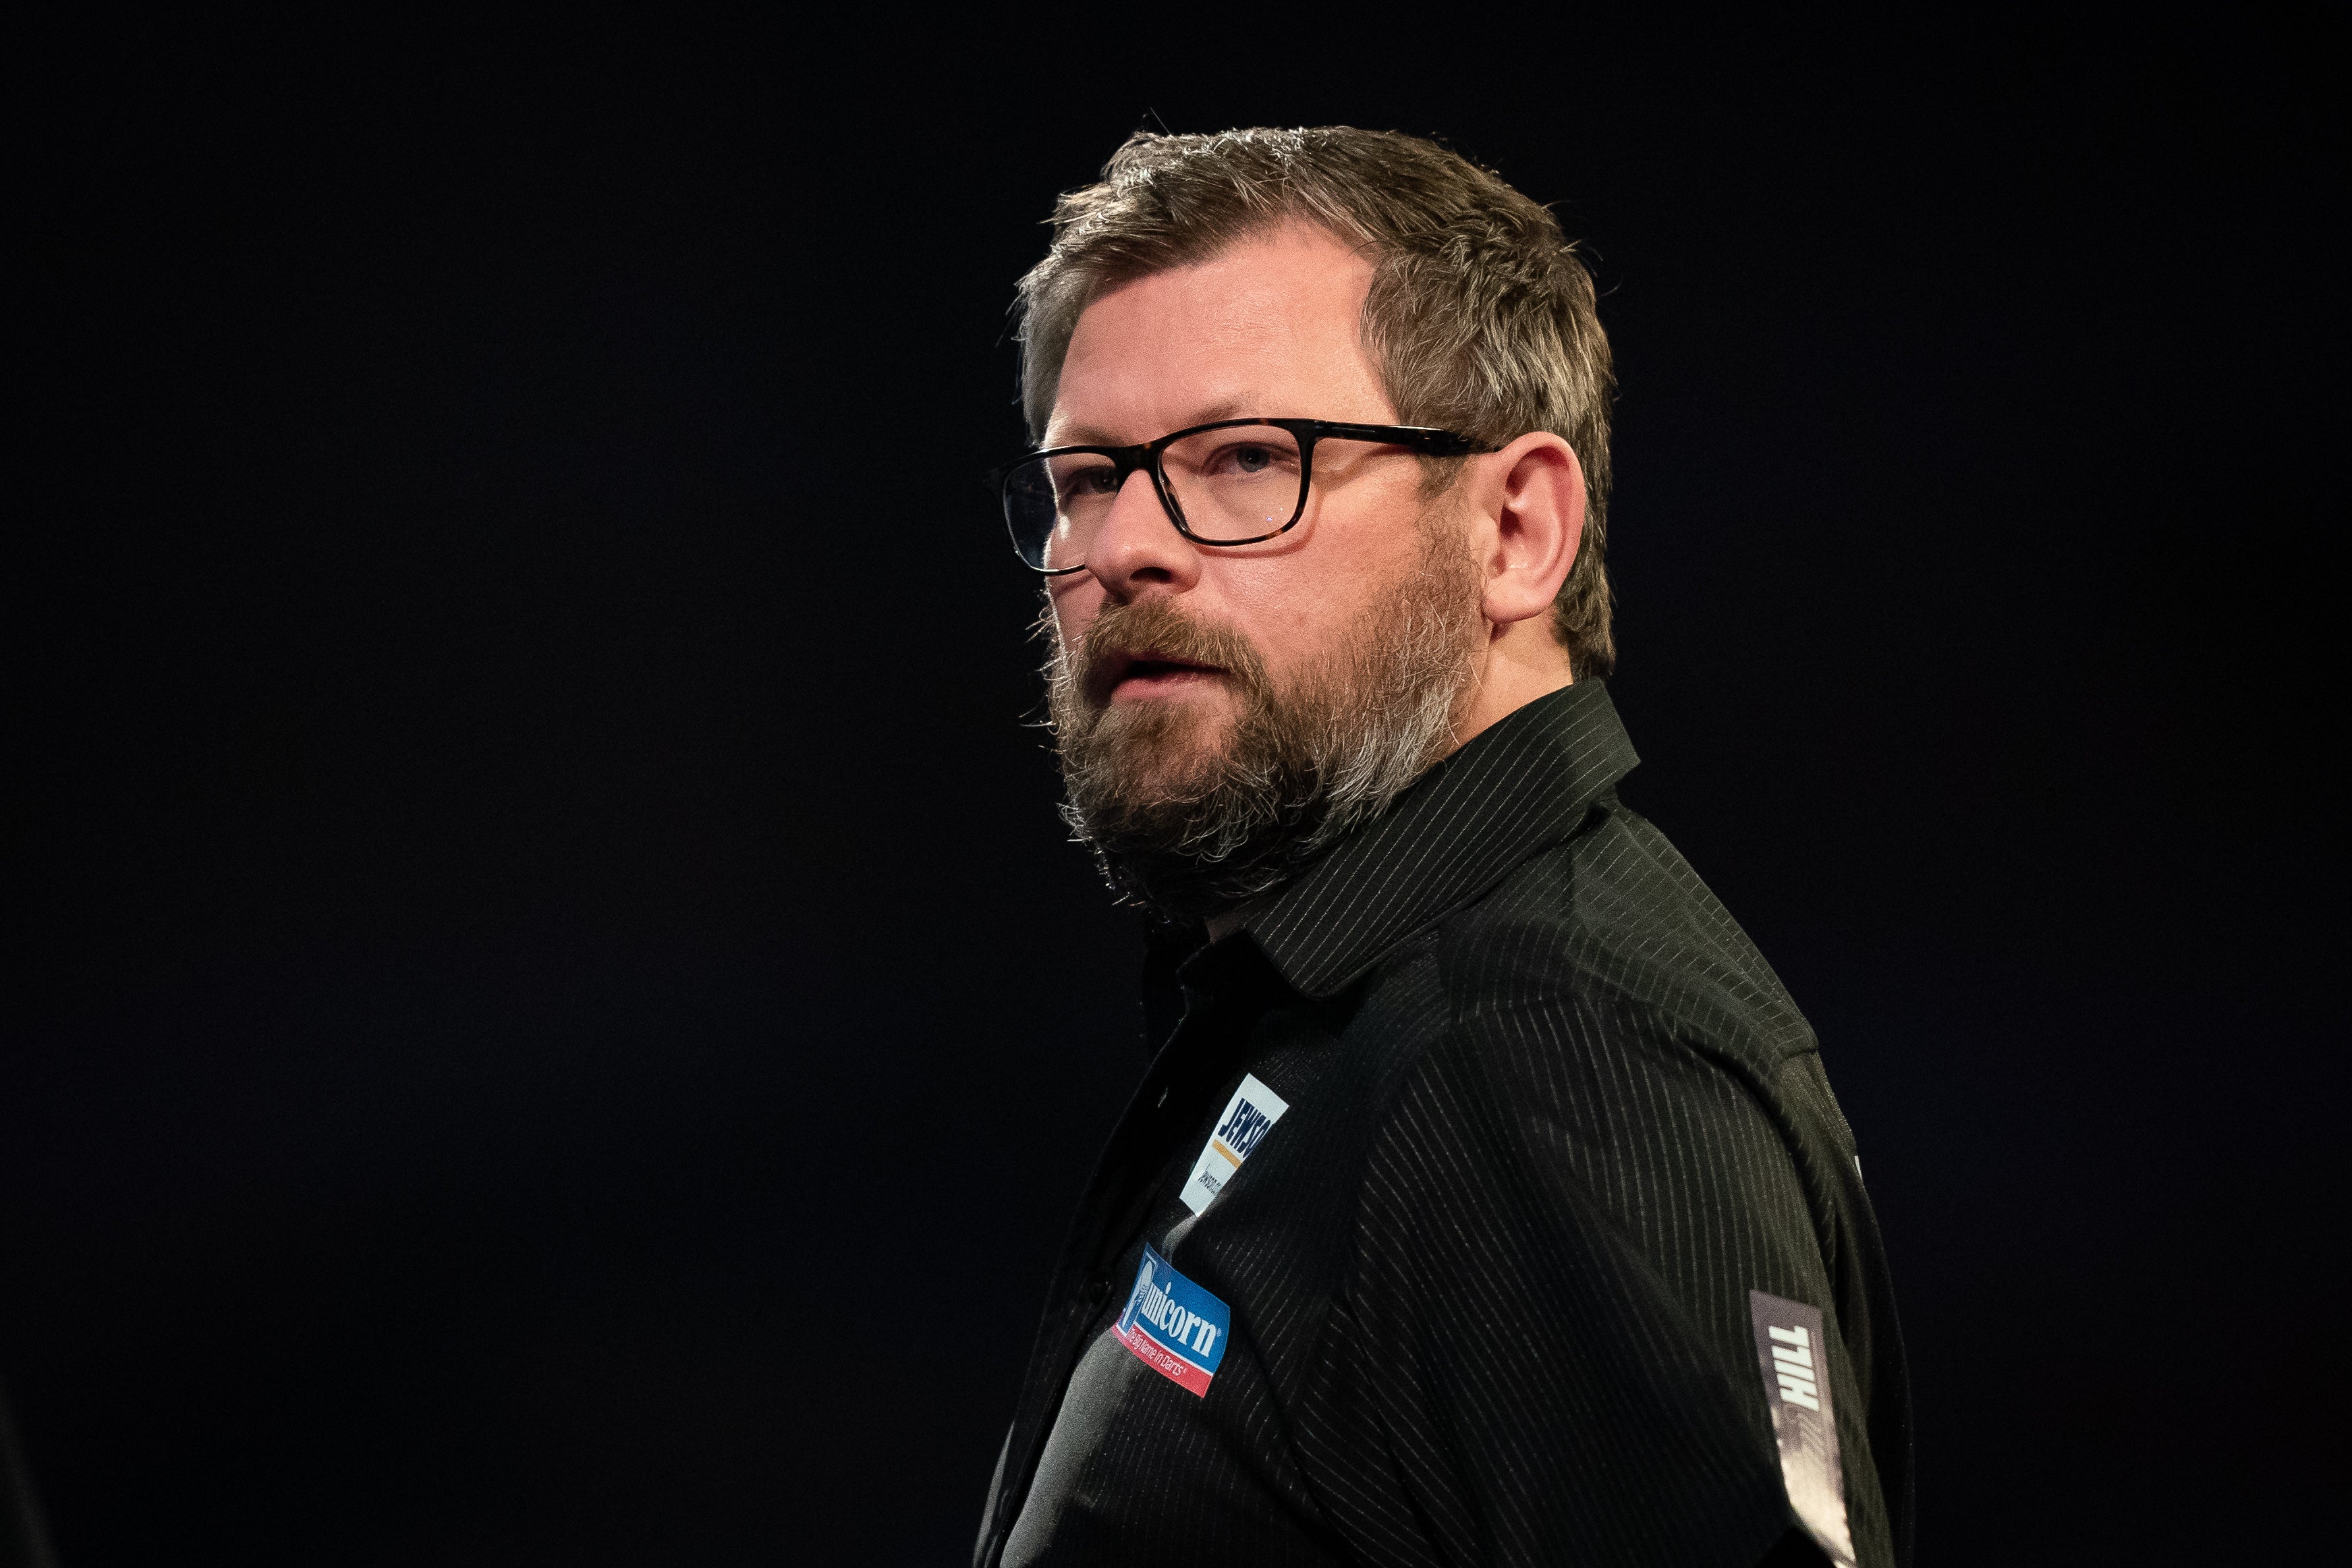 James Wade won the World Matchplay in 2007 (Aaron Chown/PA)